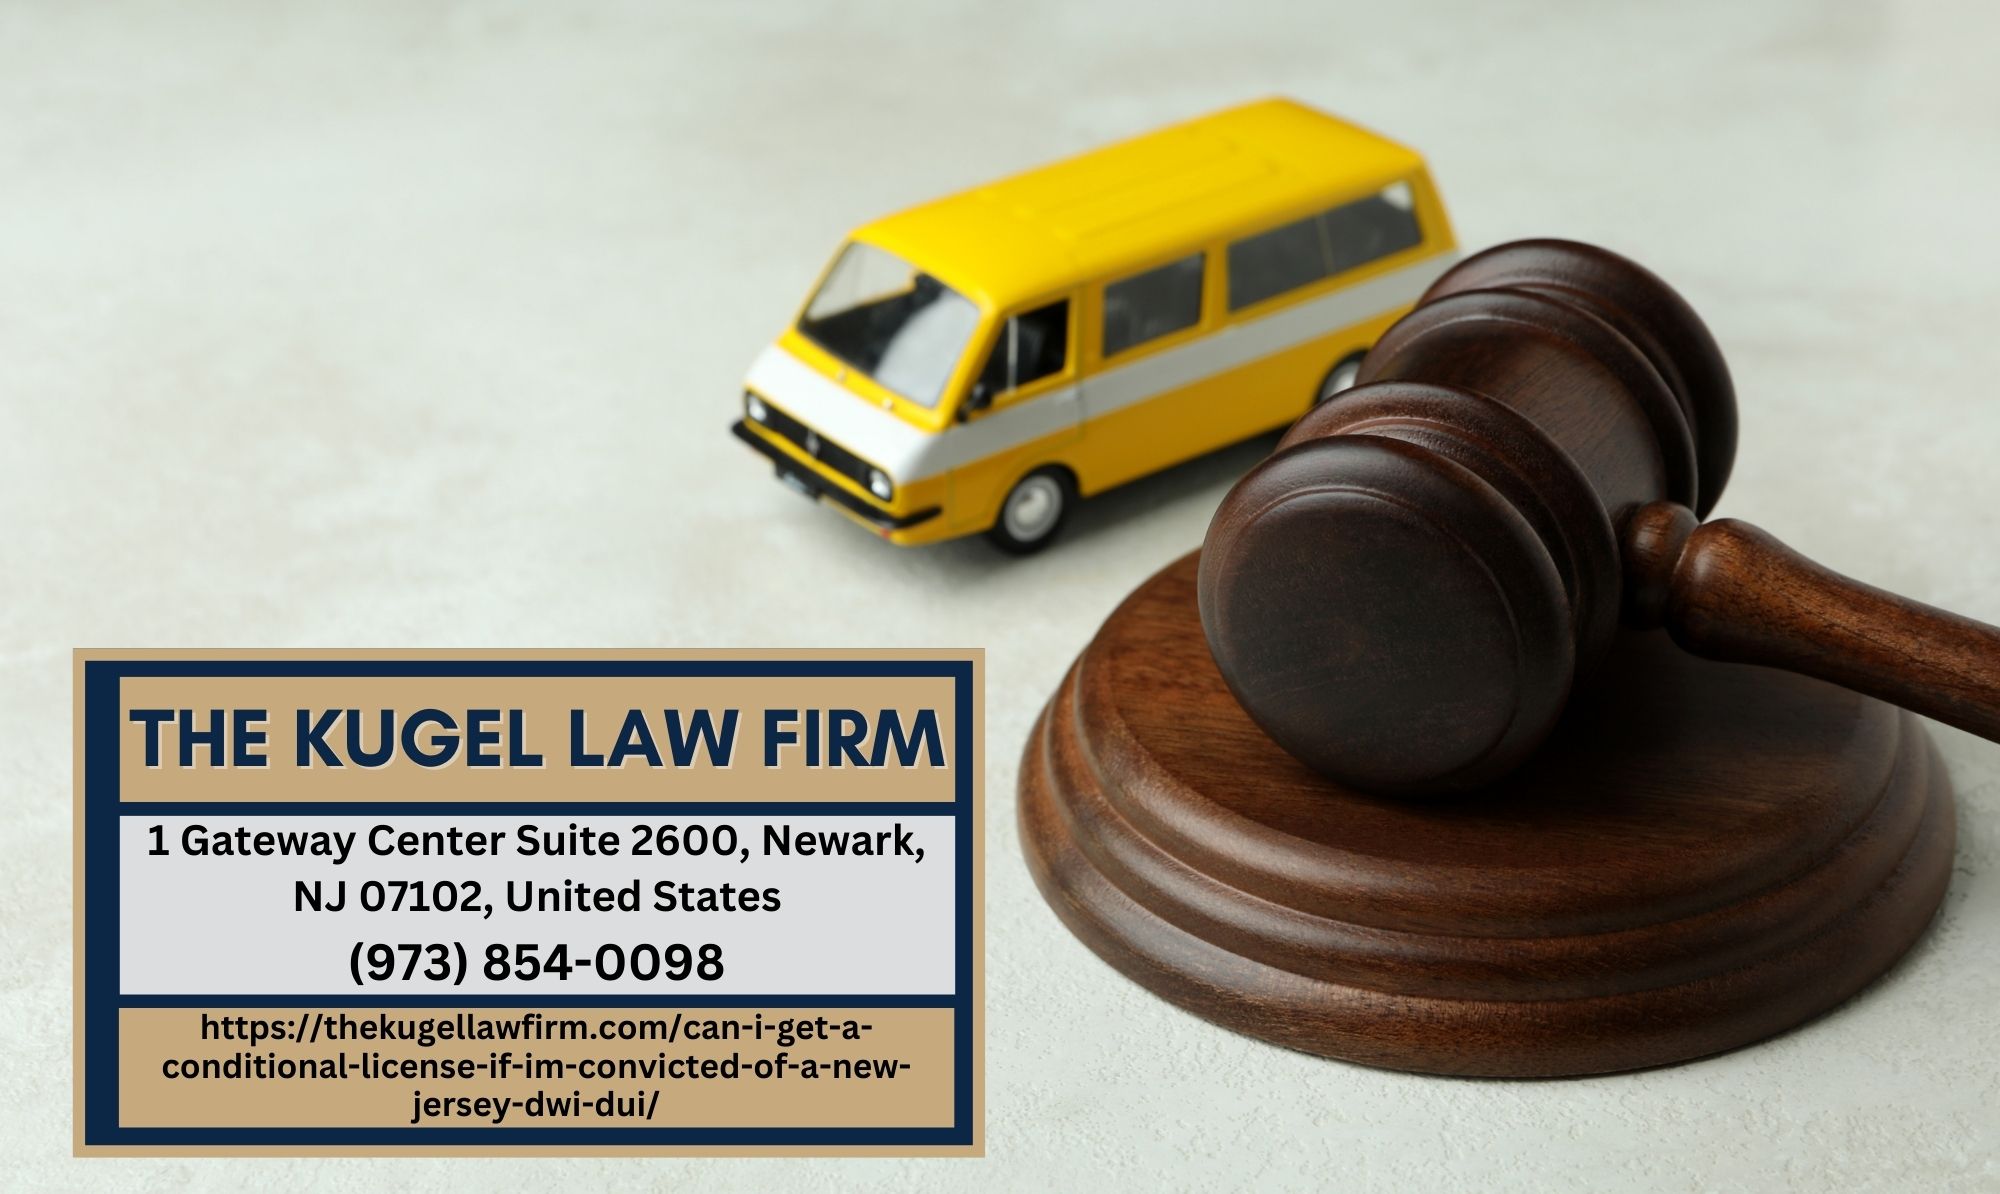 New Jersey DUI Lawyer Rachel Kugel Releases Informative Article on Conditional Licenses for DWI/DUI Convictions